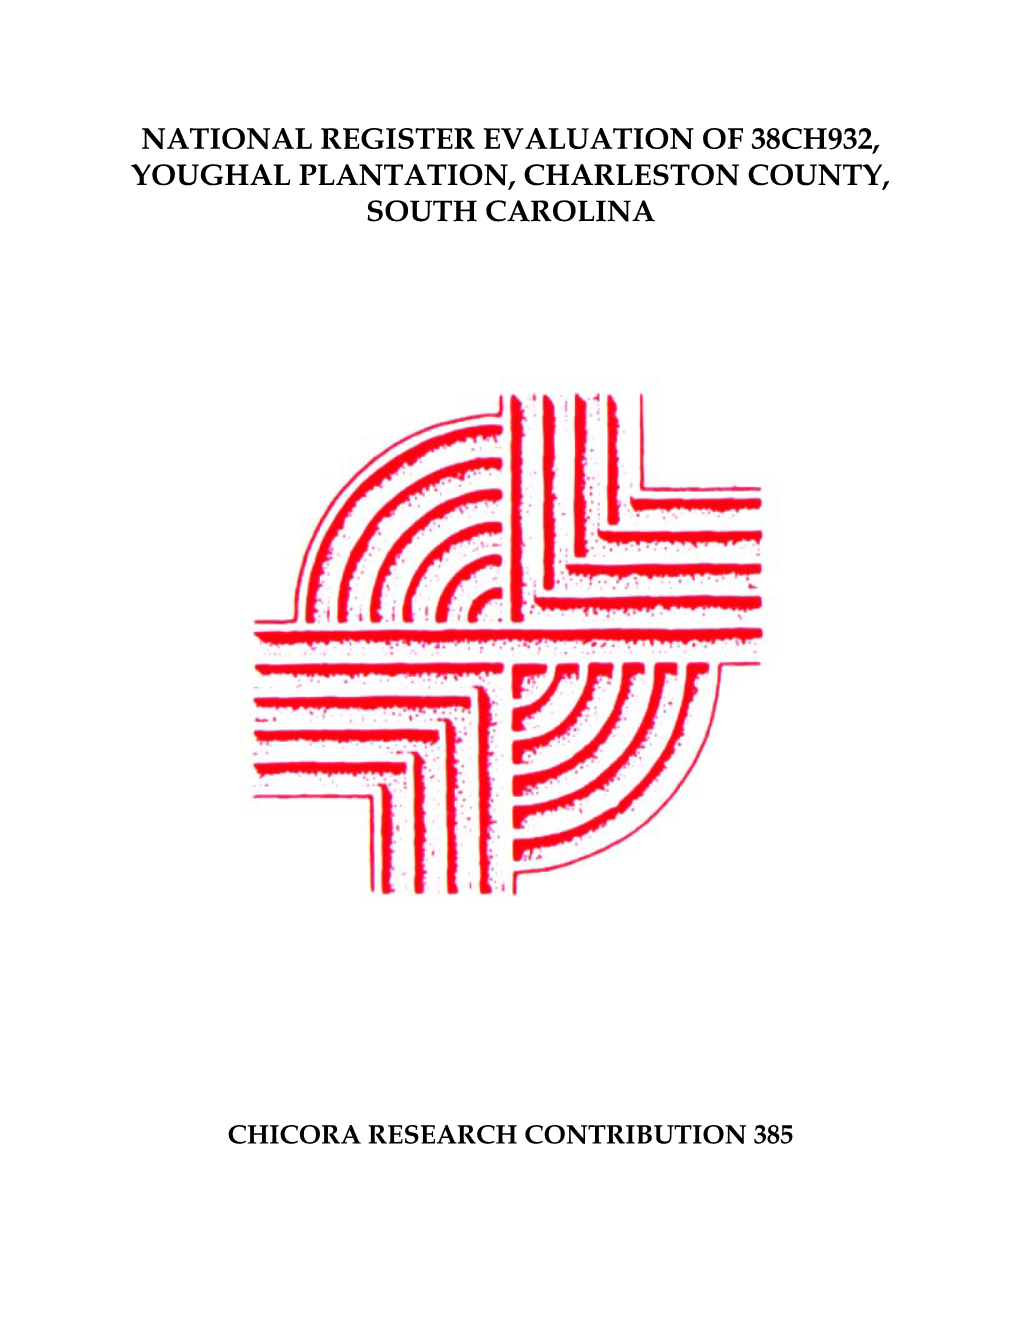 National Register Evaluation of 38Ch932, Youghal Plantation, Charleston County, South Carolina